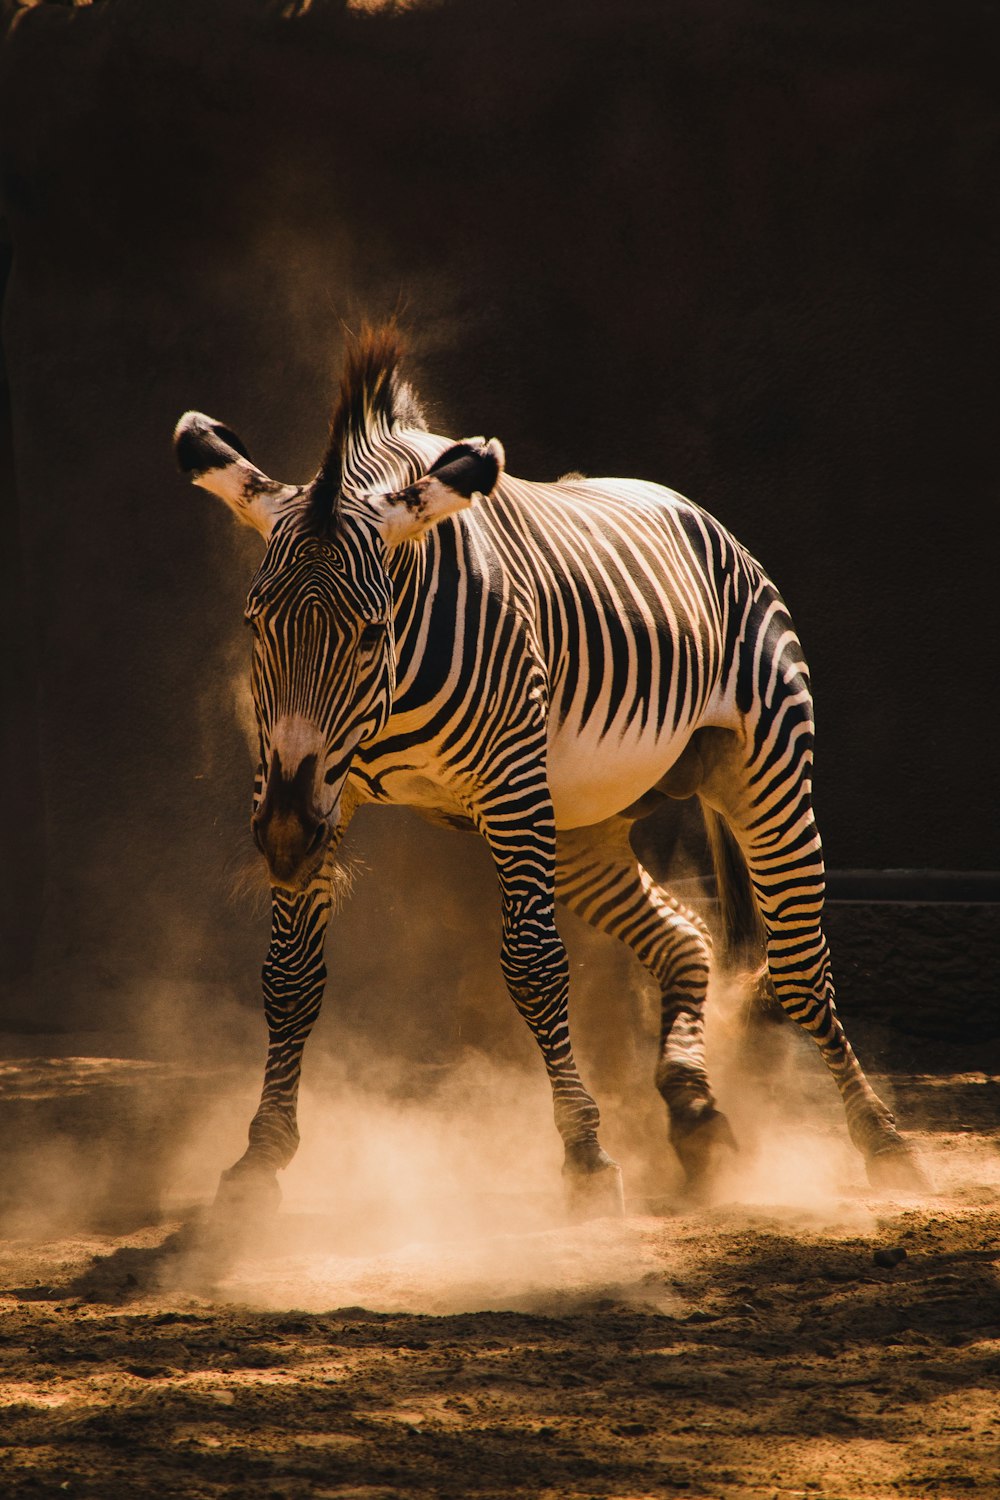 a zebra kicking up dust while standing on top of a dirt field